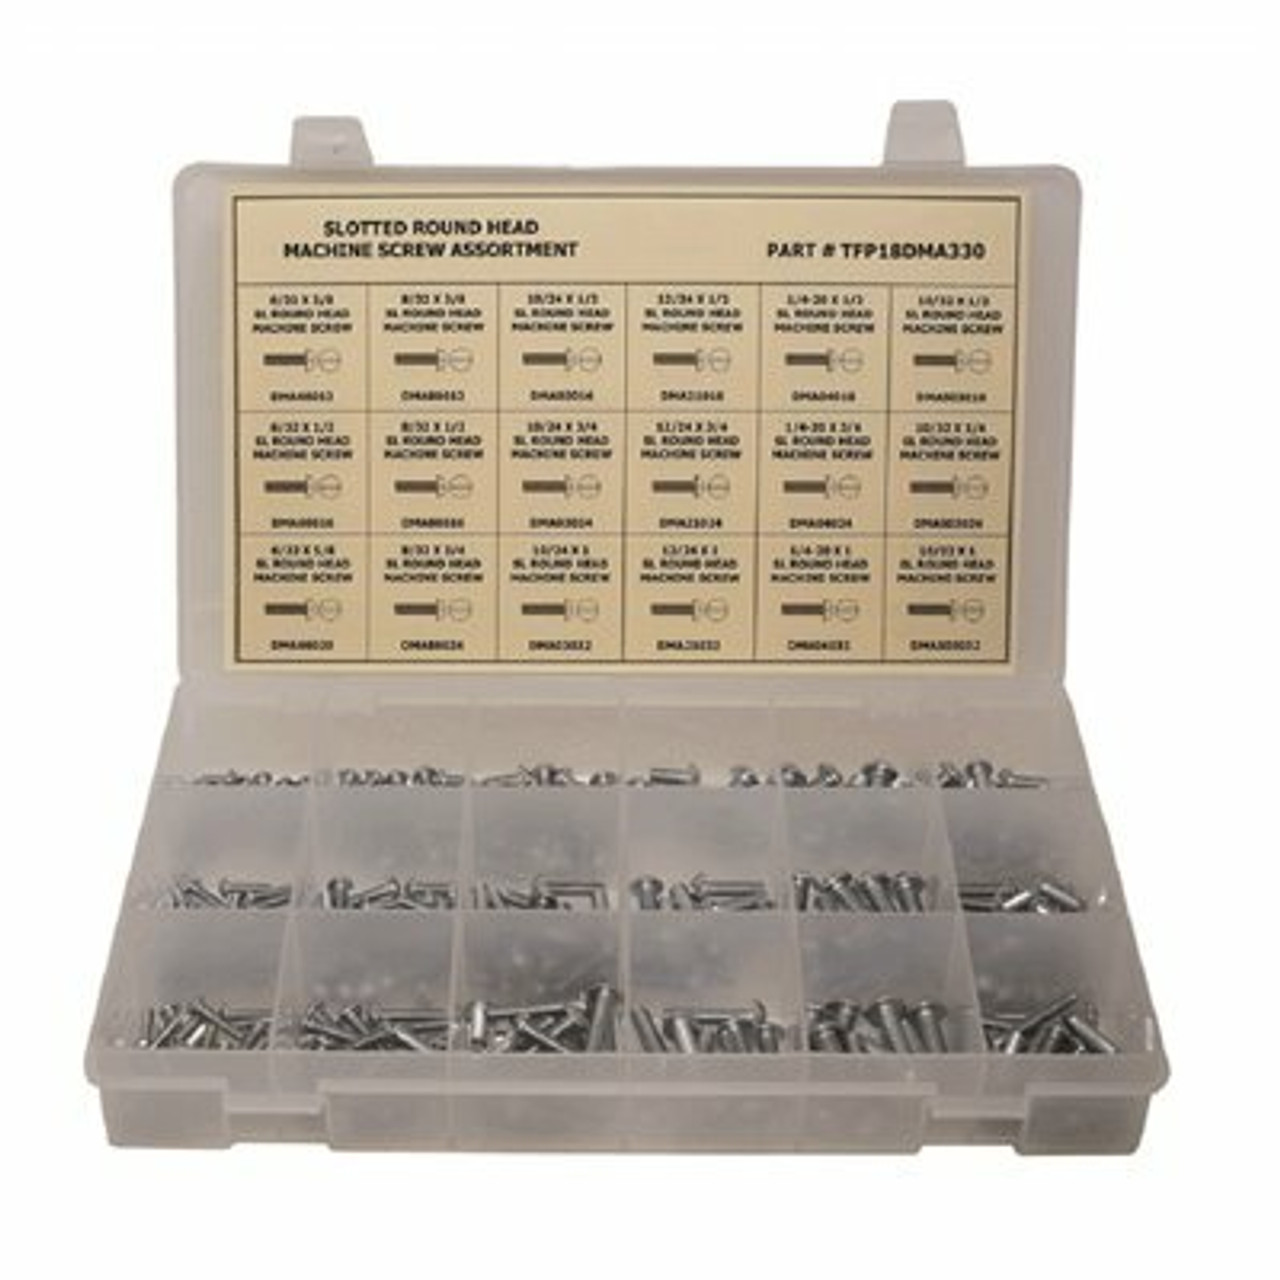 Zinc Plated Slotted Round Head Machine Screw Assortment In Plastic Tray (330-Pieces)